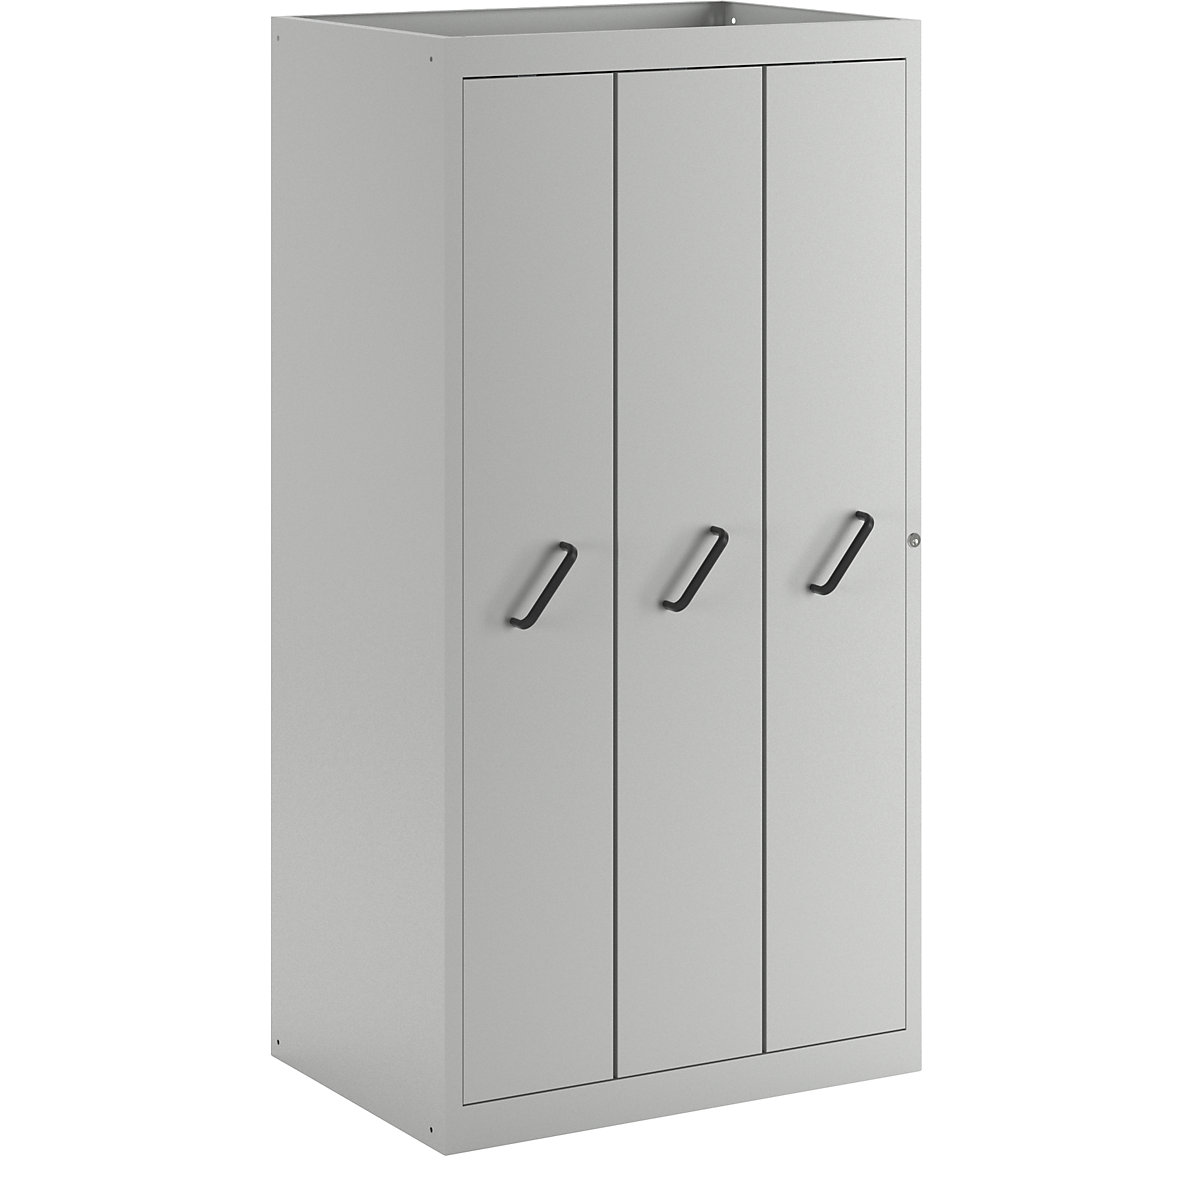 Vertical pull-out cupboard with front cover panels – LISTA